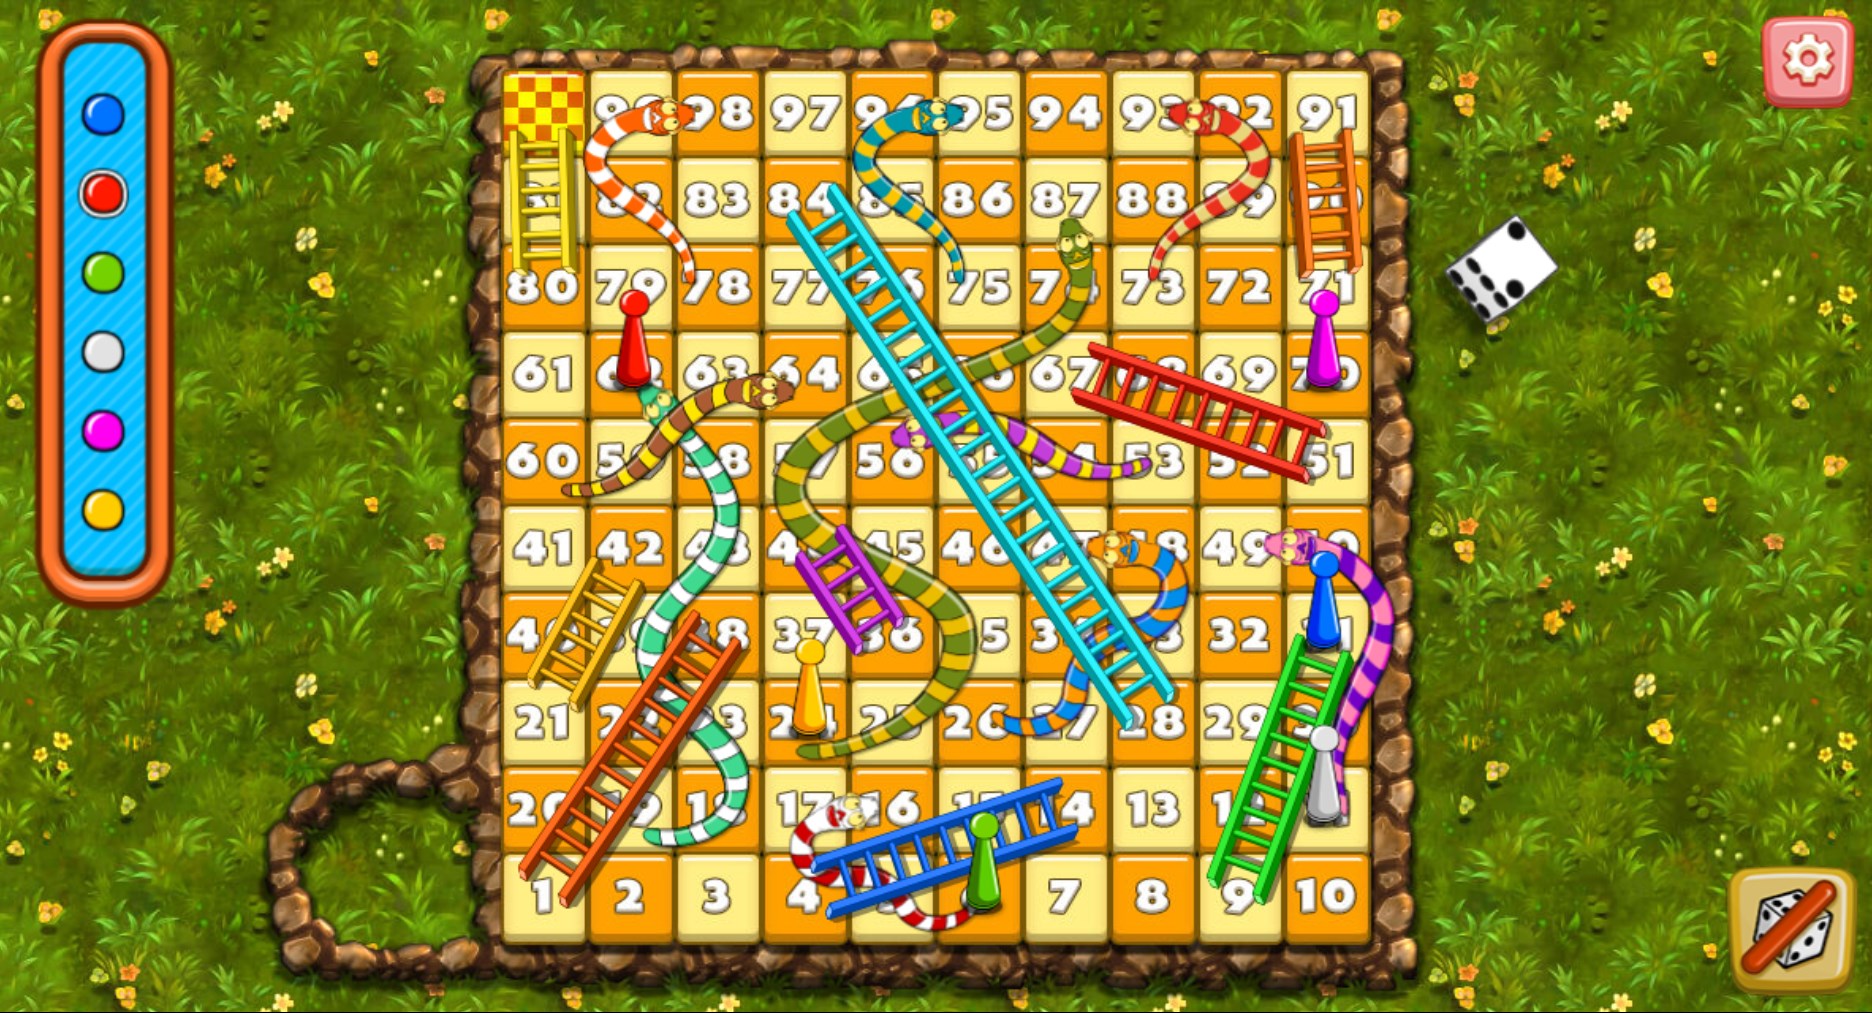 Preview image of Snakes & Ladders